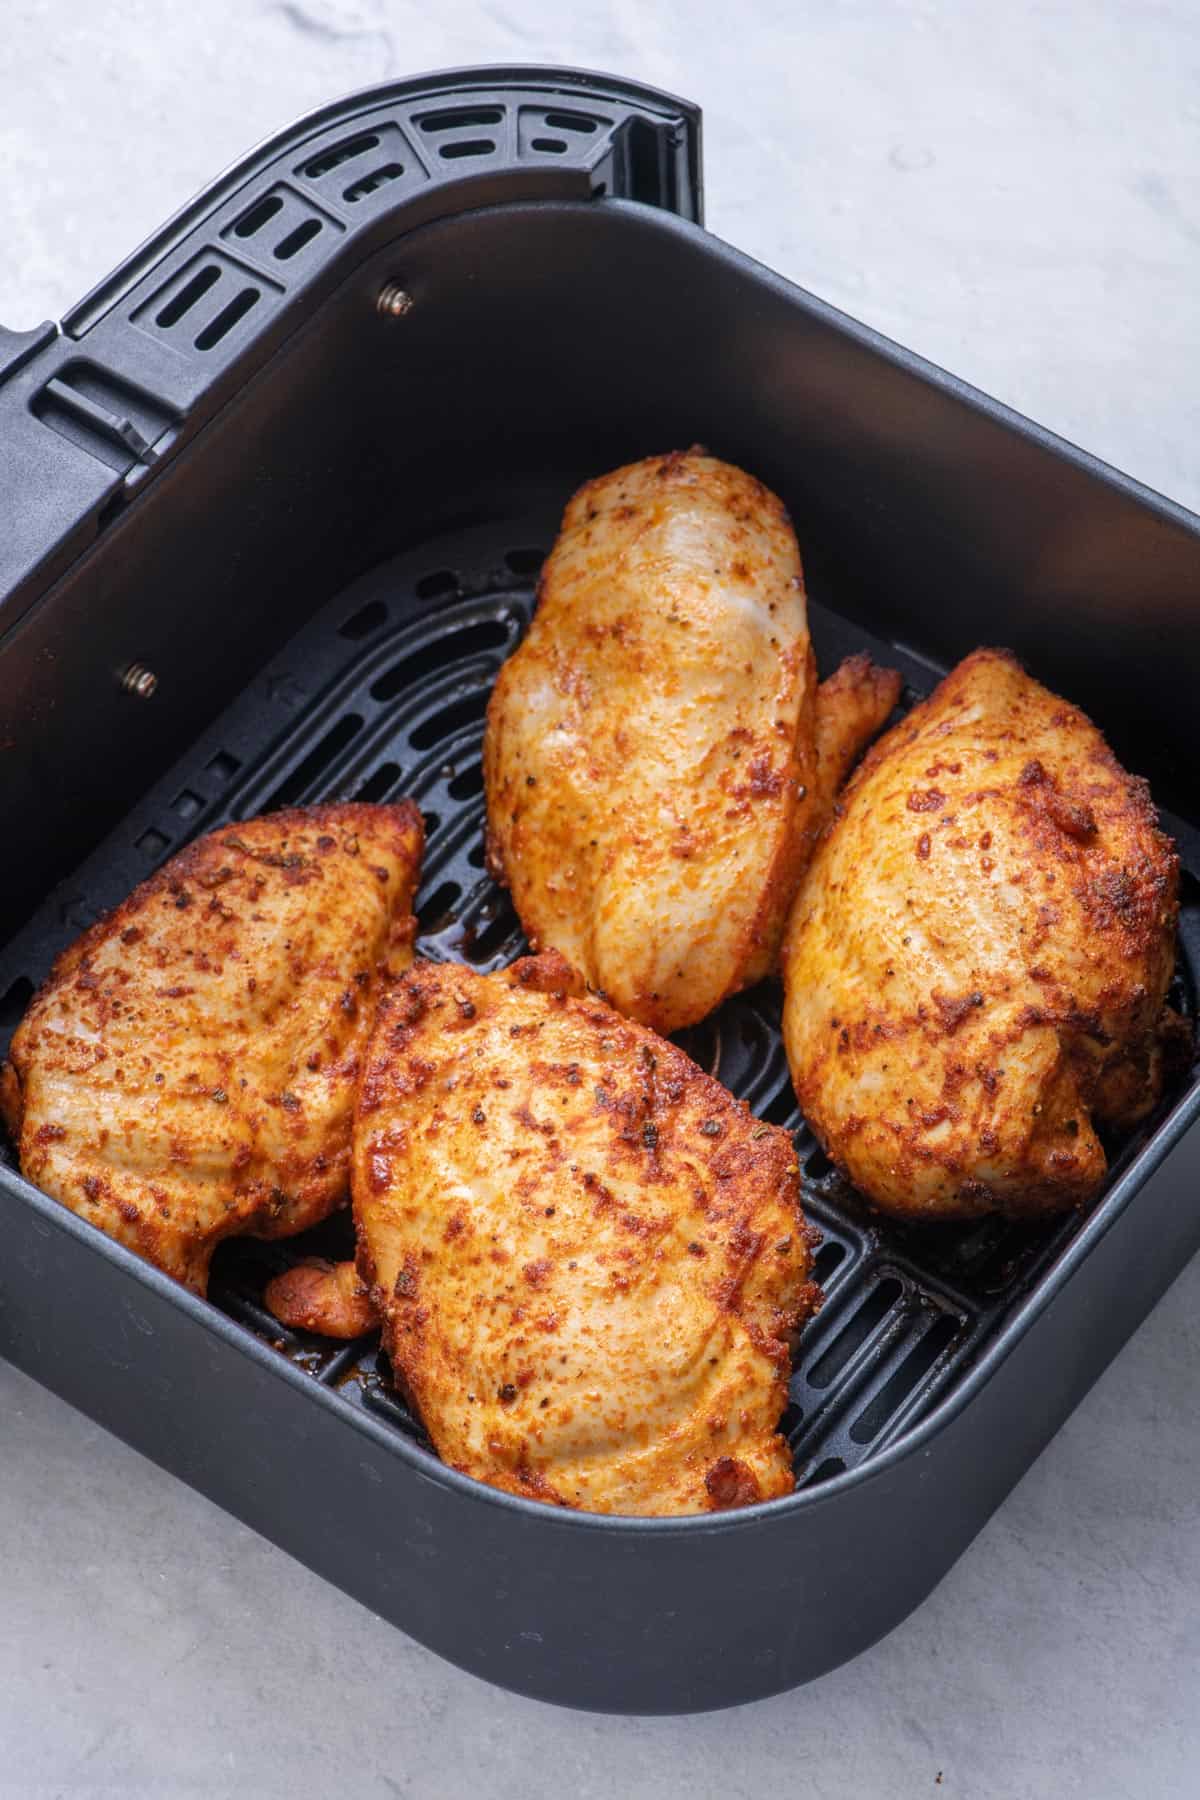 Chicken cooked in the air fryer sitting the basket